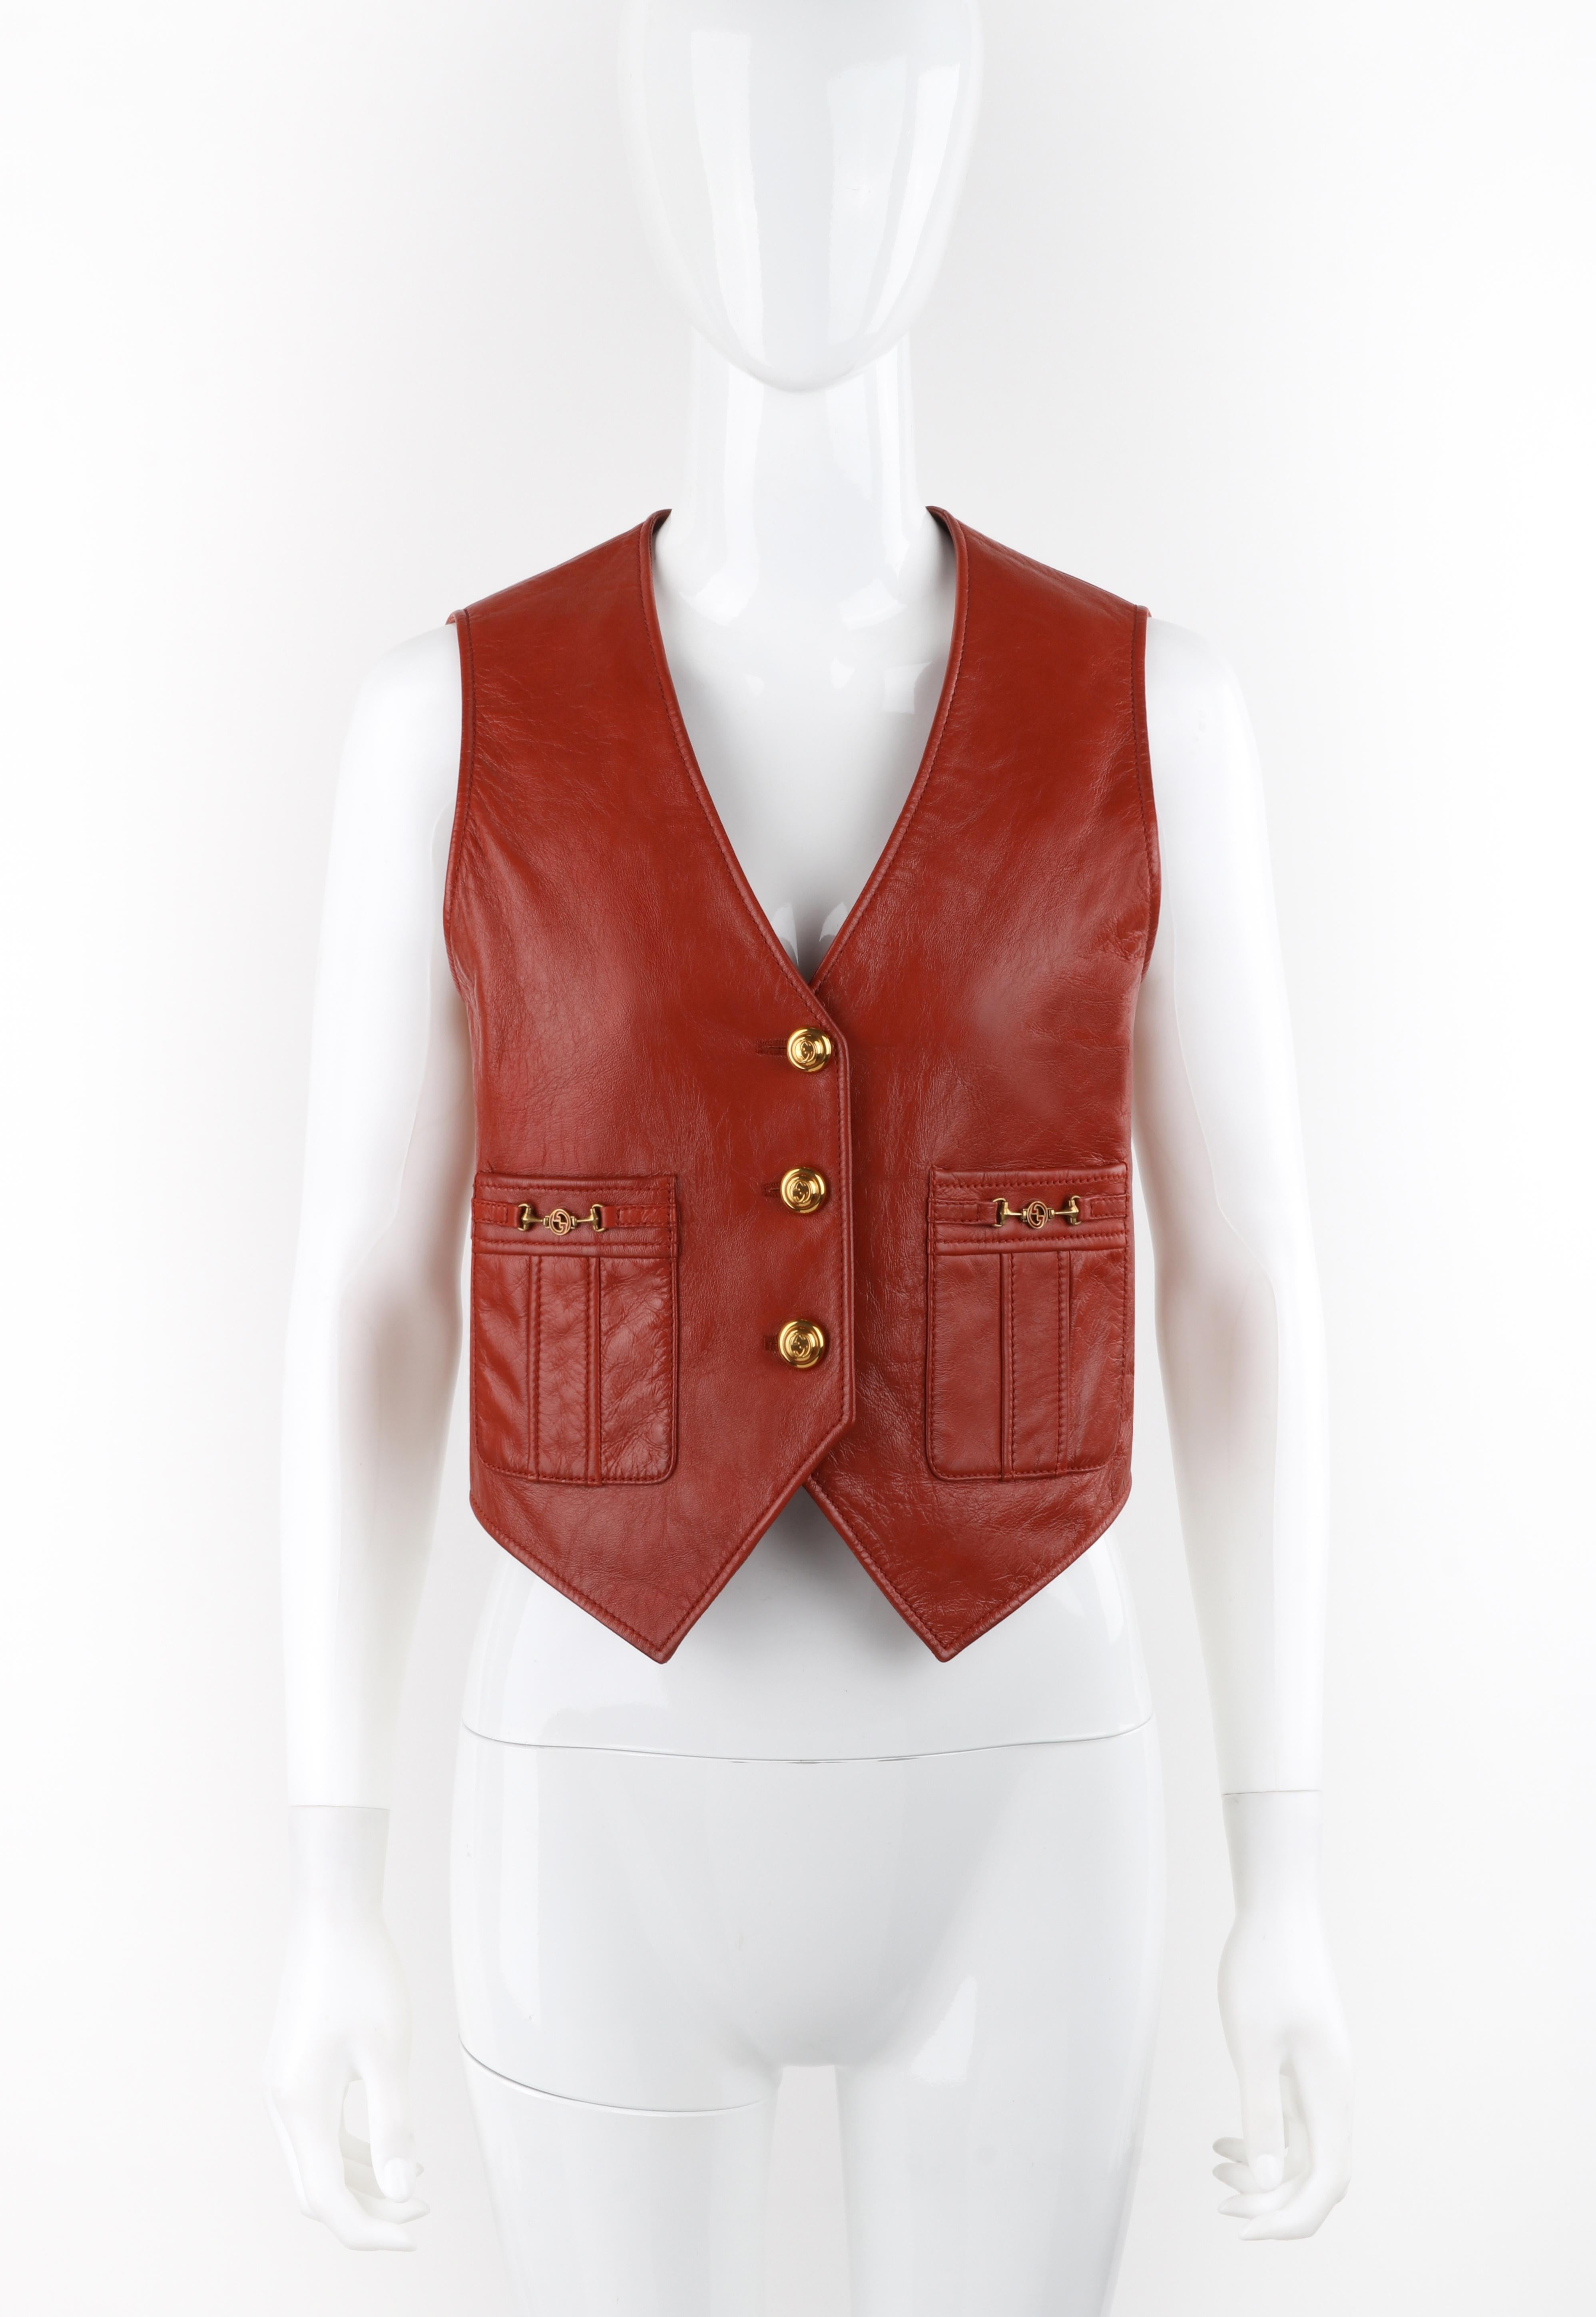 Brand / Manufacturer: Gucci
Collection: Pre-fall 2019
Designer: Alessandro Michele
Style: Waistcoat Vest
Color(s): Shades of brown, gold
Lined: Yes
Marked Fabric Content: 